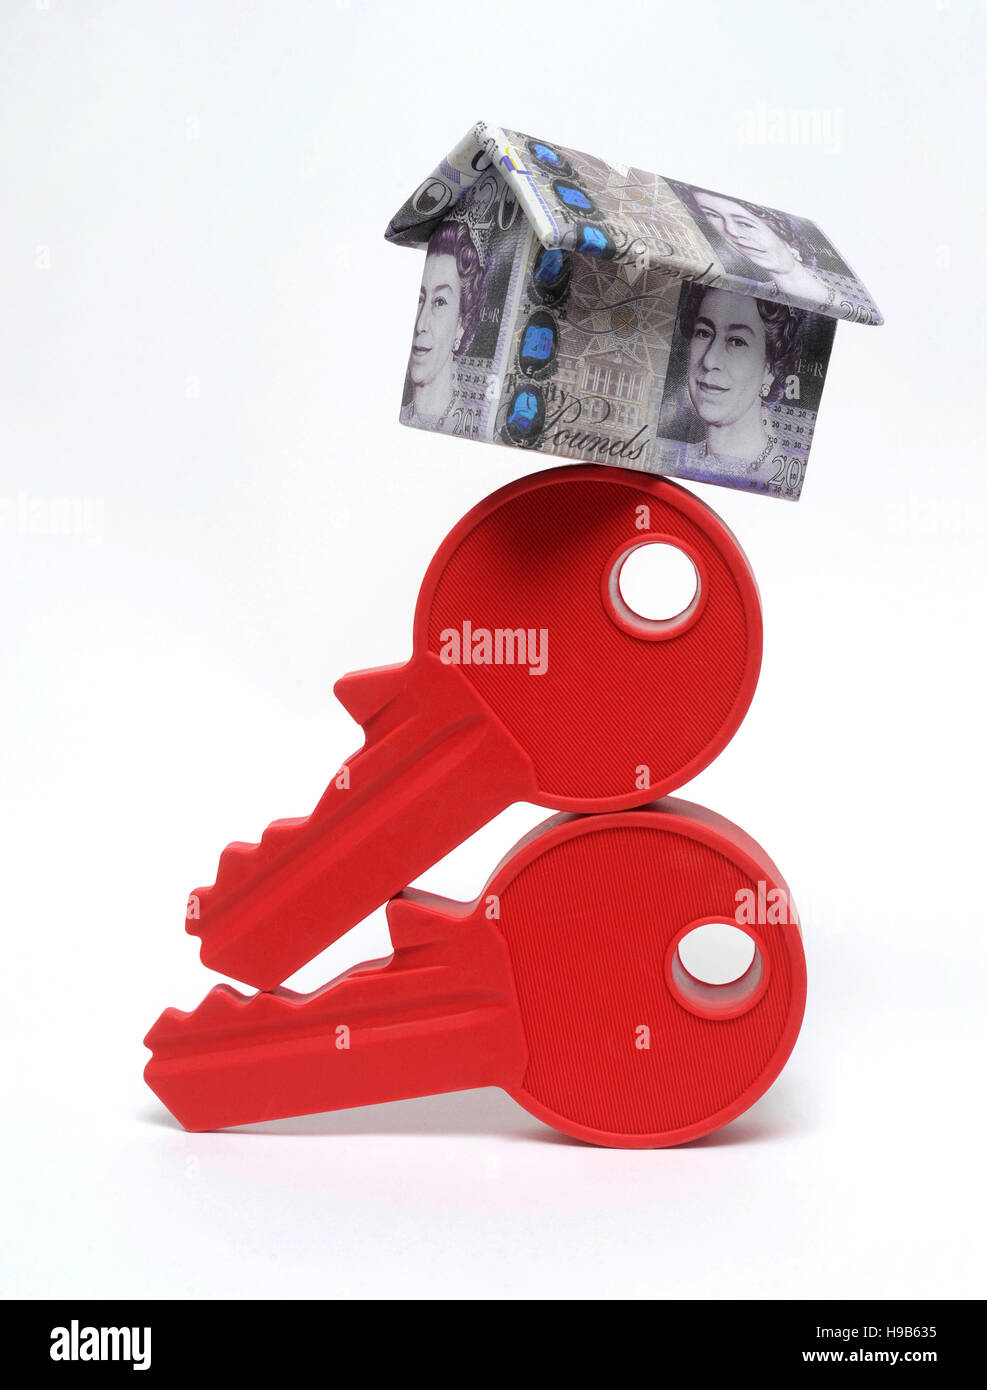 HOUSE MADE FROM £20 NOTES BALANCING ON HOUSE KEYS RE HOUSING MARKET HOMES BUYING PRICES MORTGAGES LOANS FIRST TIME BUYERS UK Stock Photo